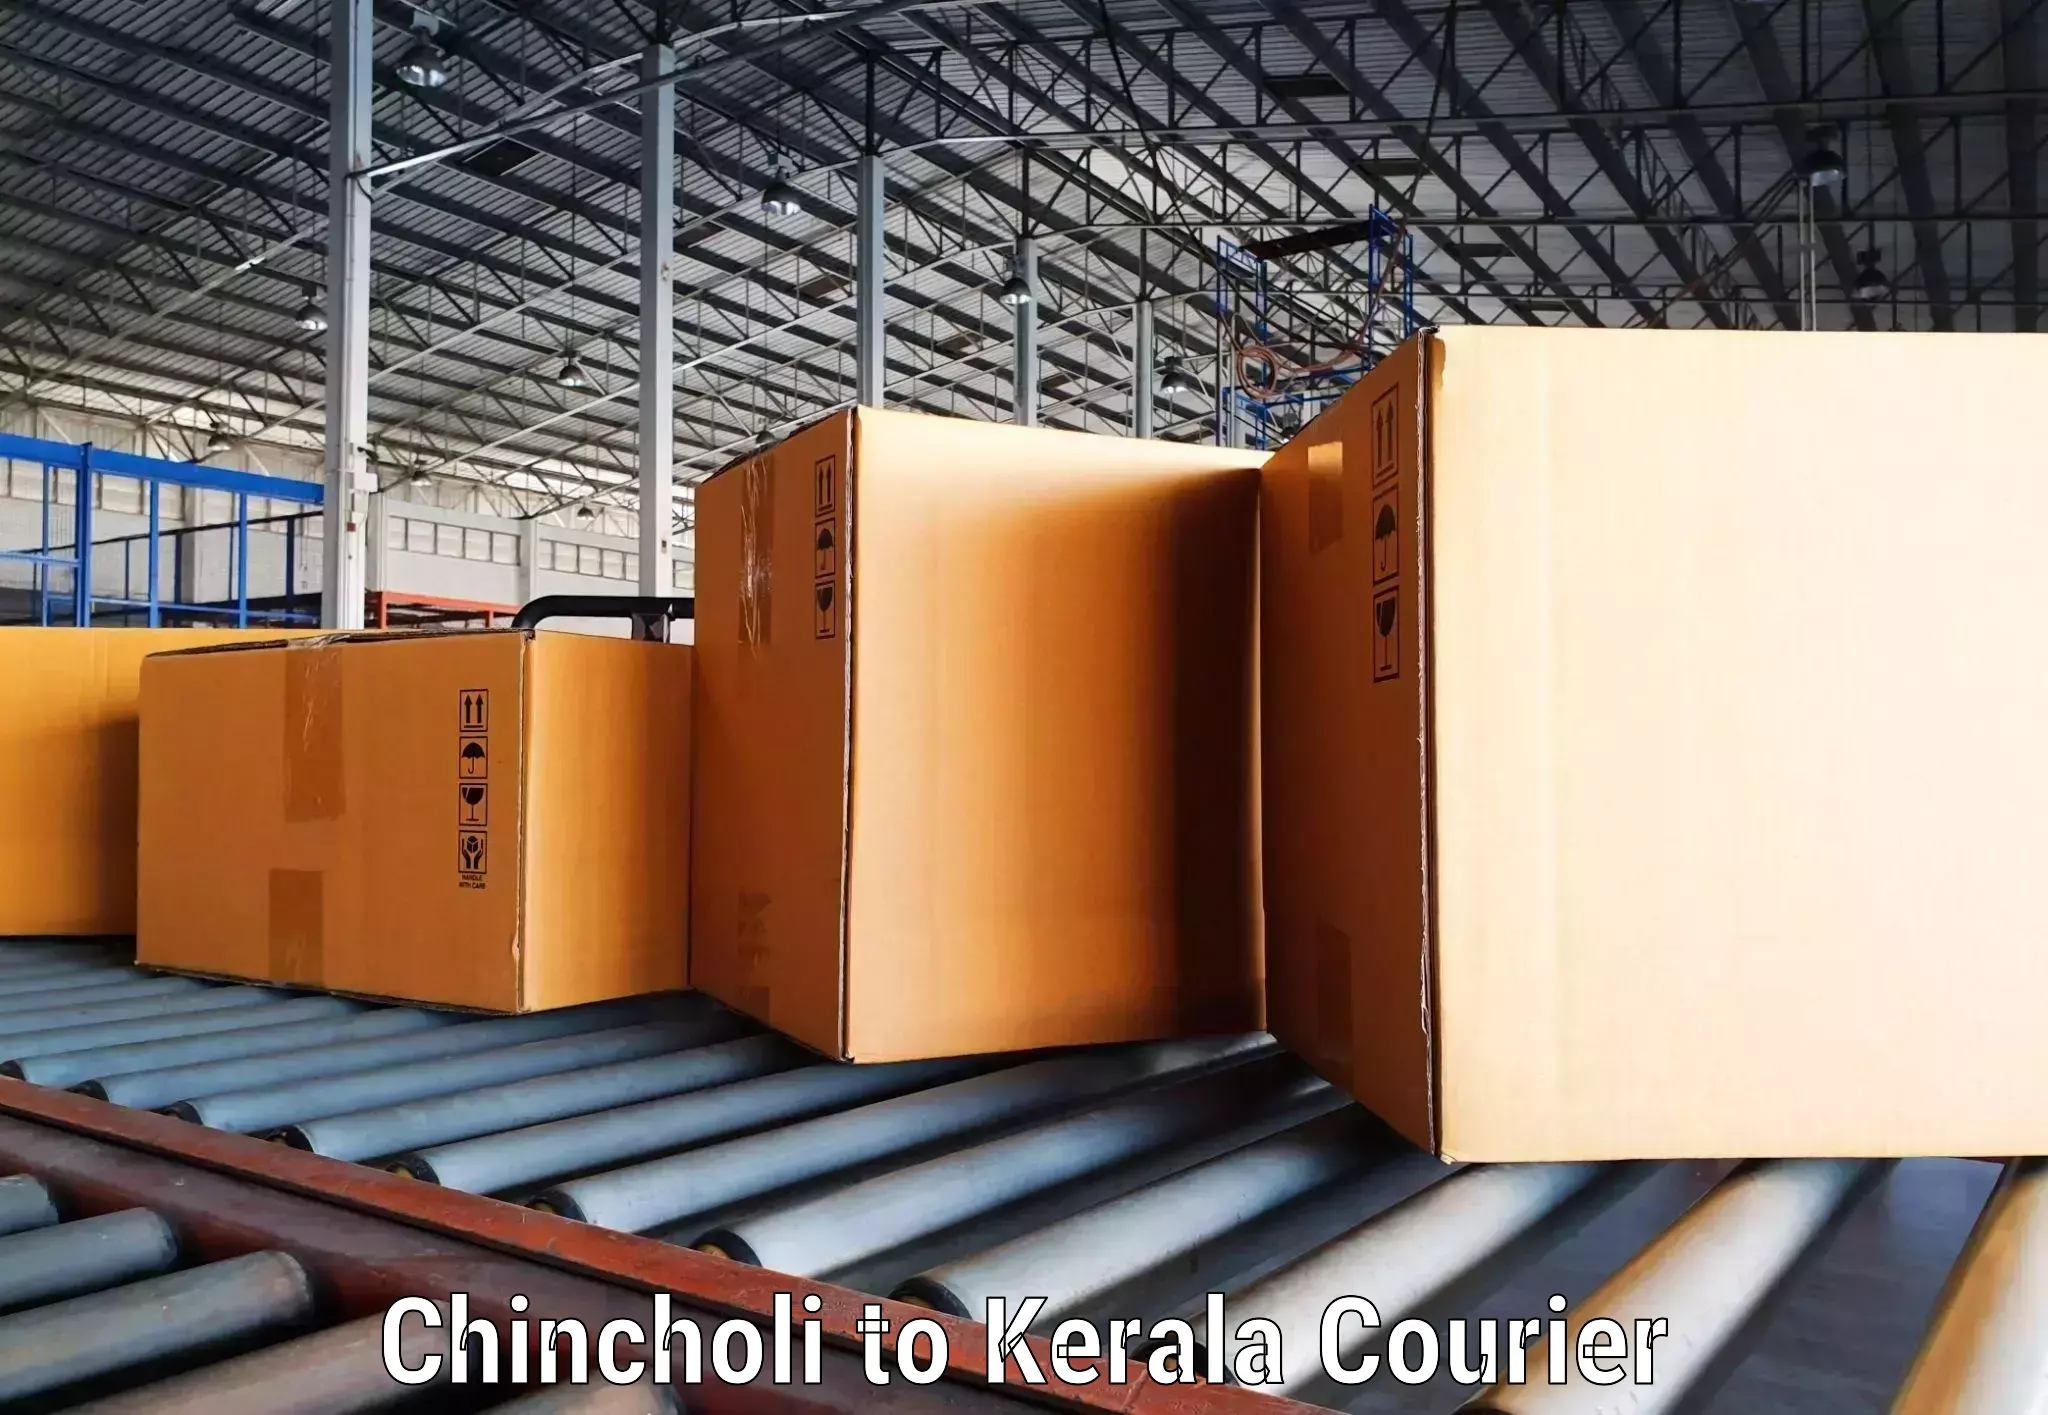 Multi-national courier services Chincholi to Trivandrum